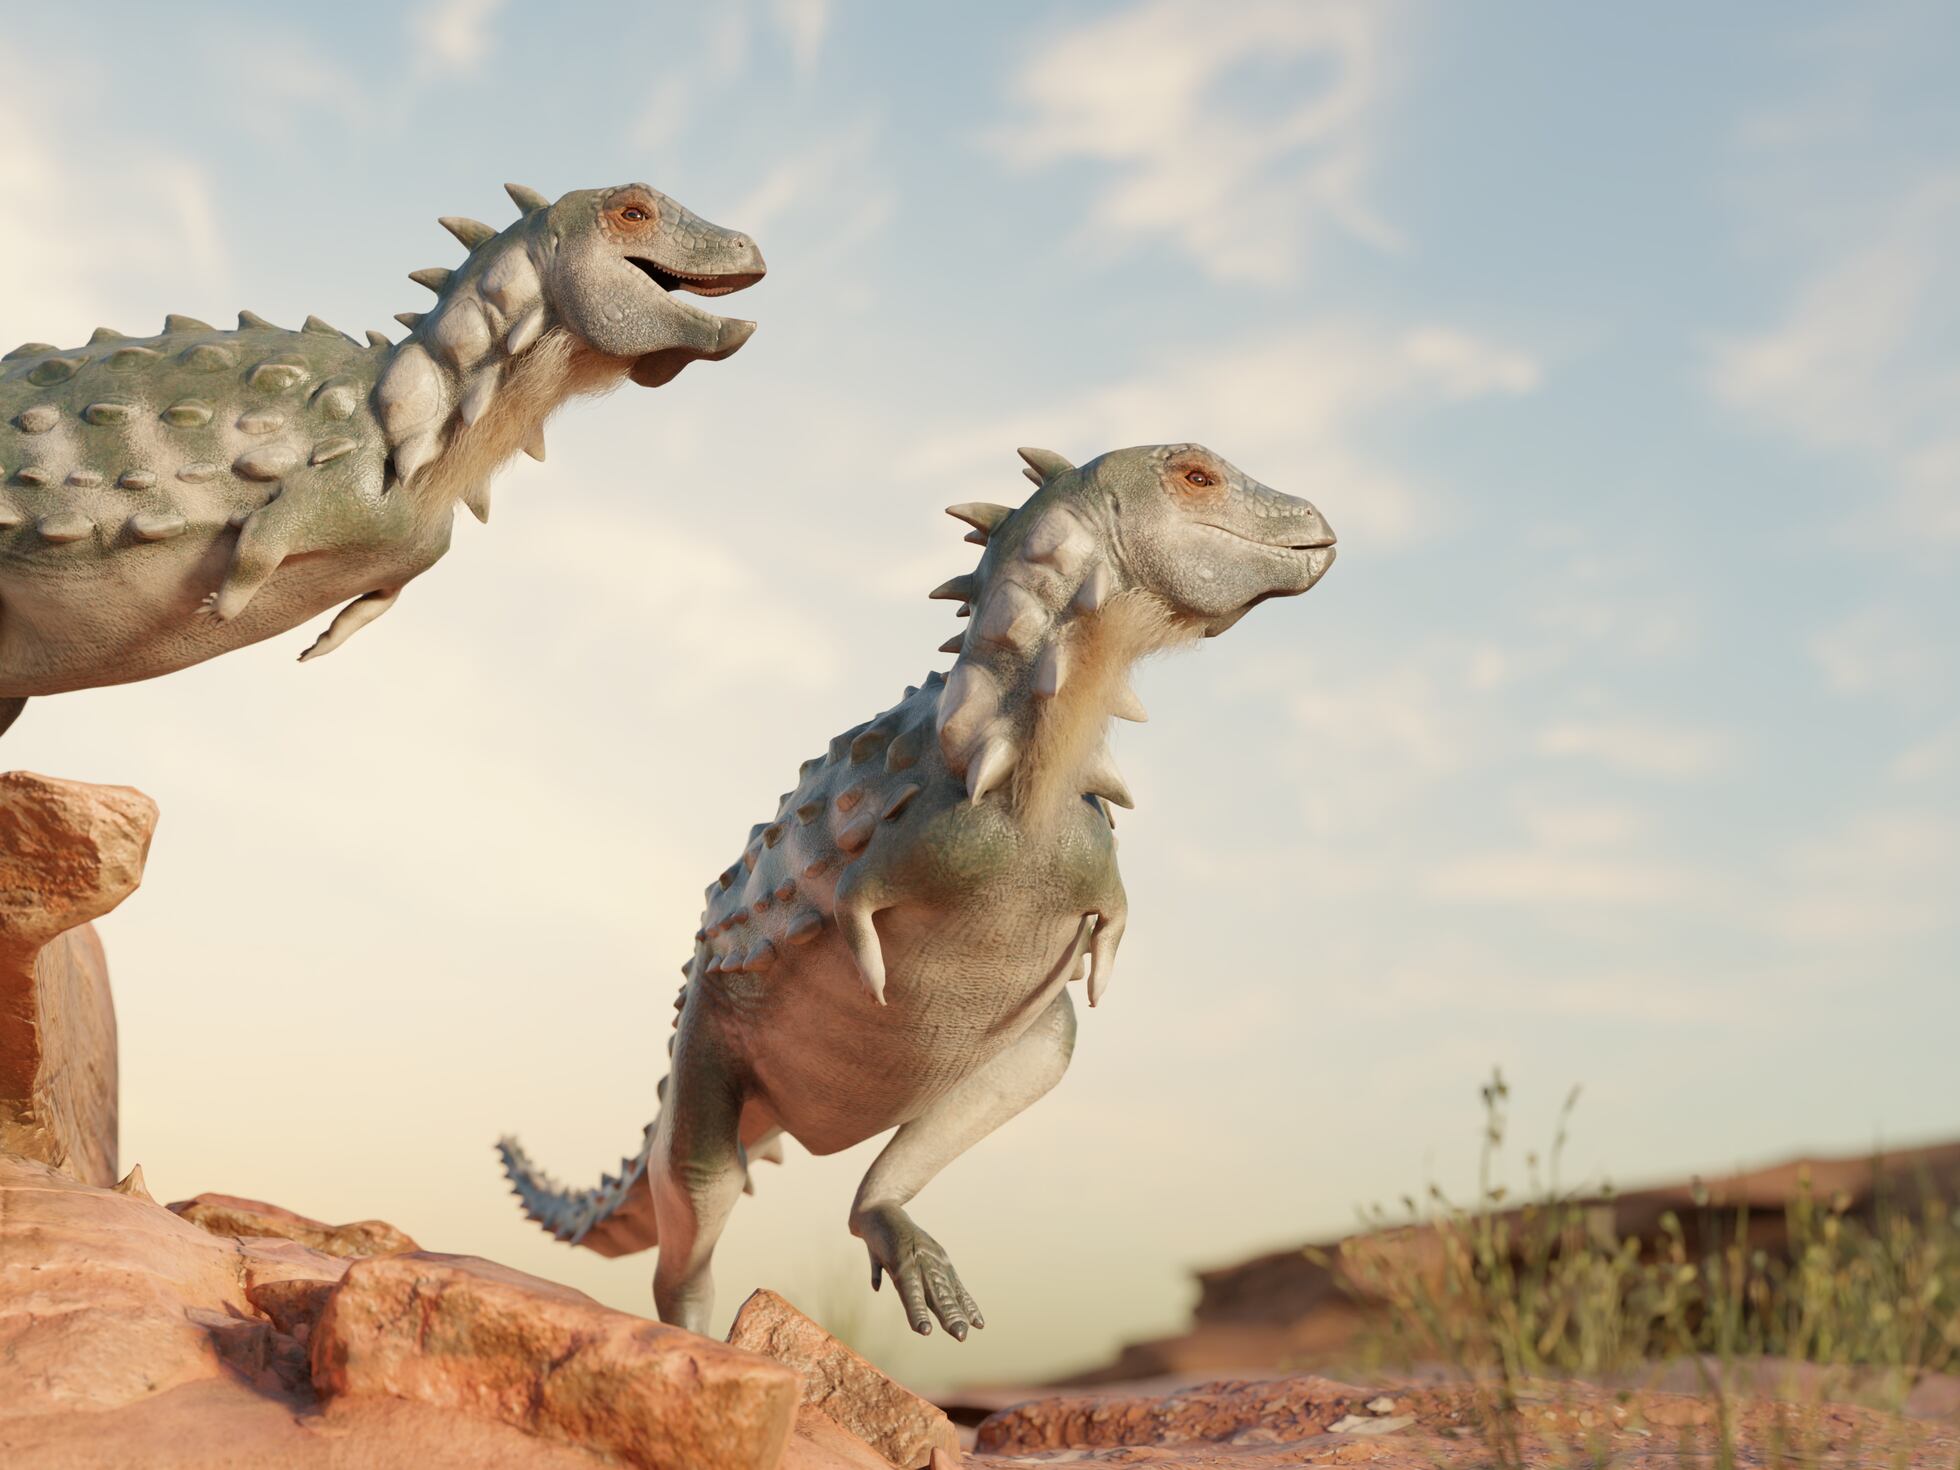 New dinosaur was a plant-eating speed runner